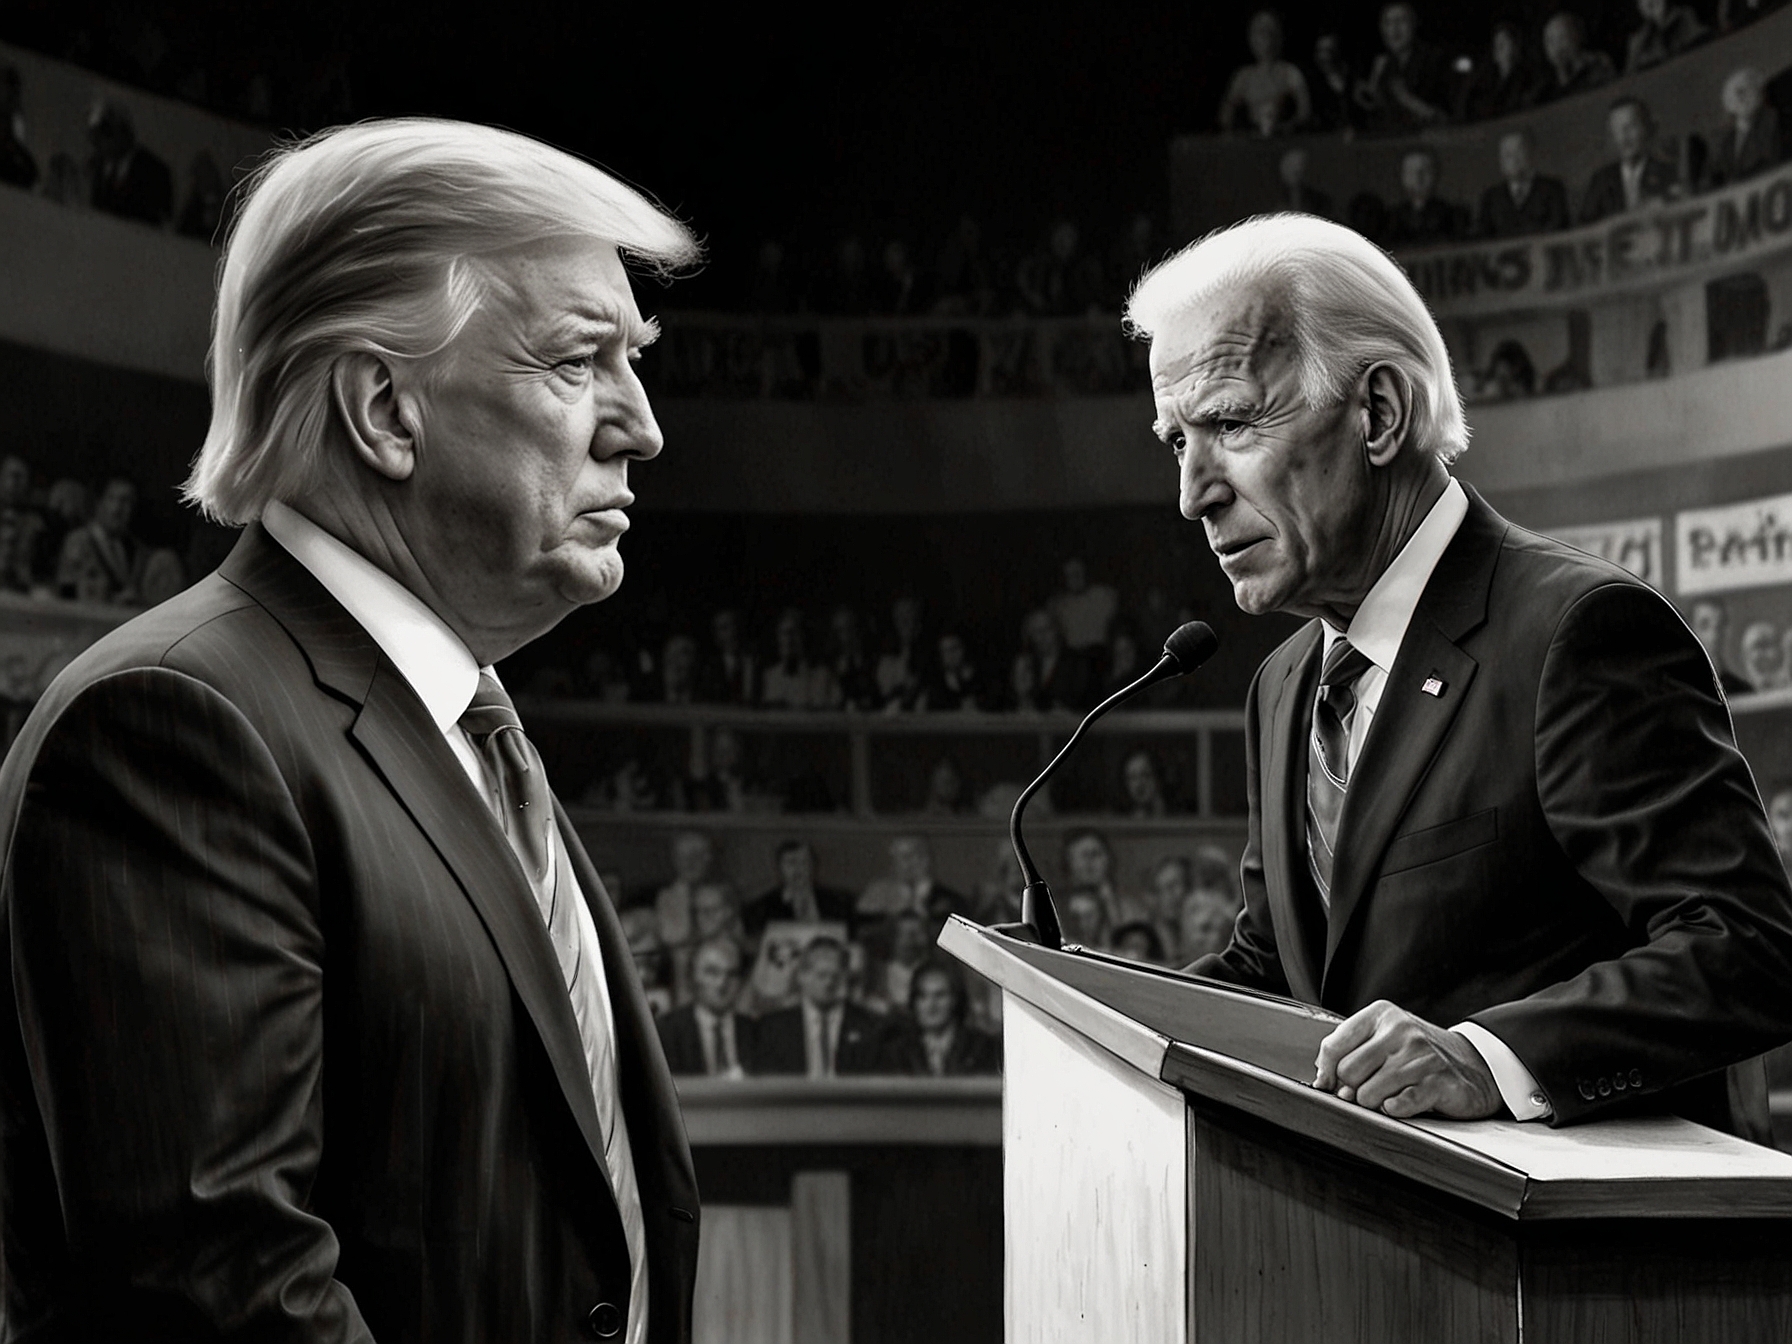 Depiction of former President Trump maintaining a composed demeanor during the debate, successfully deflecting criticism and keeping Biden on the defensive, as described in the article.